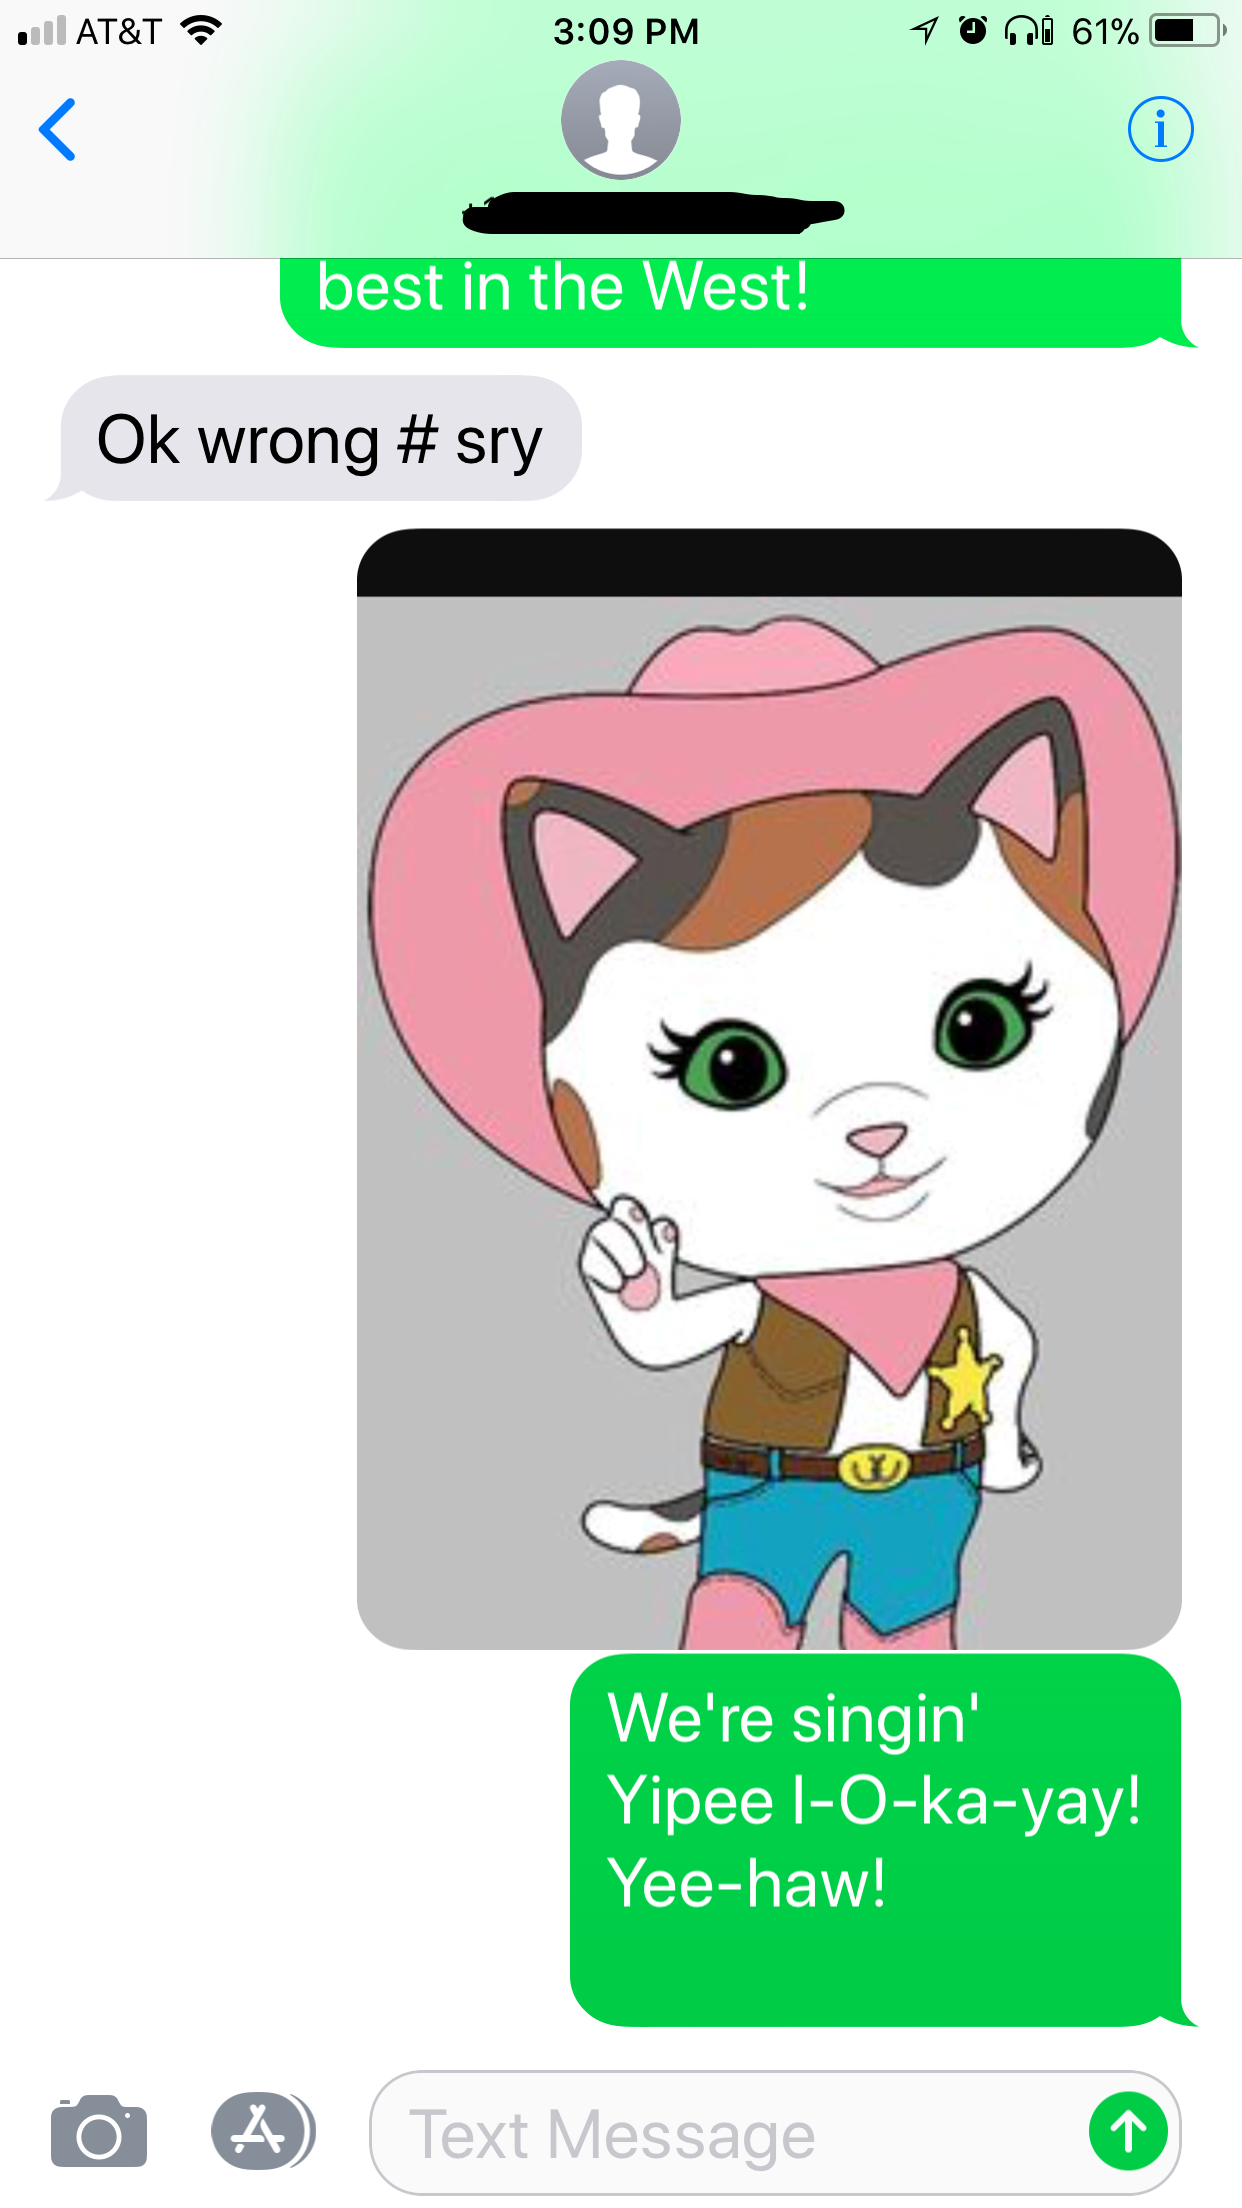 sheriff callie memes - At&T Yo 61% best in the West! Ok wrong We're singin' YipeelOkayay! Yeehaw! O A Text Message